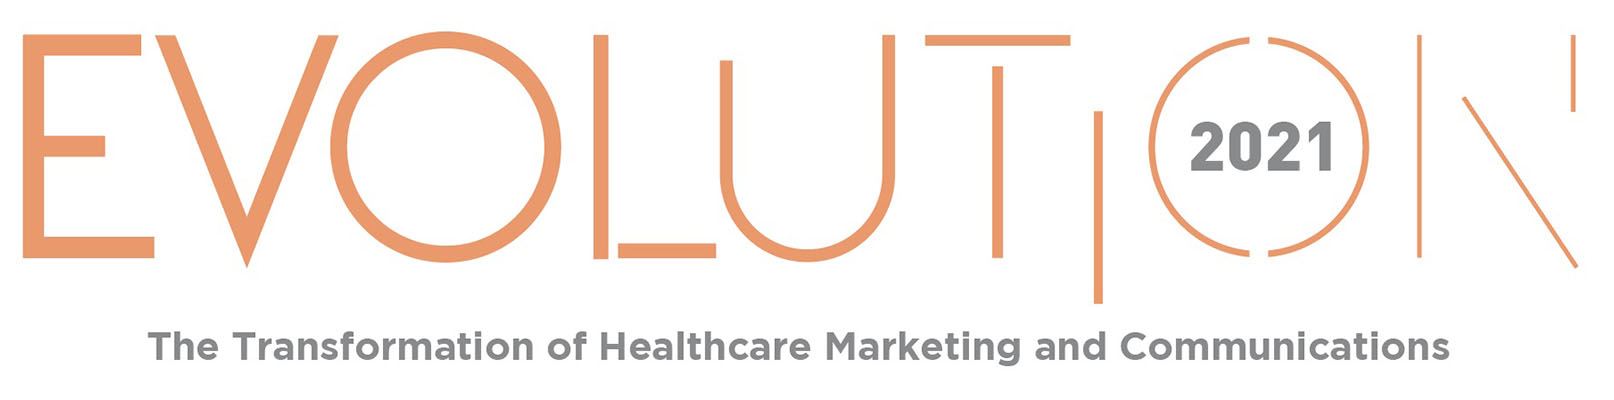 Evolution 2021: The Transformation of Healthcare Marketing and Communications